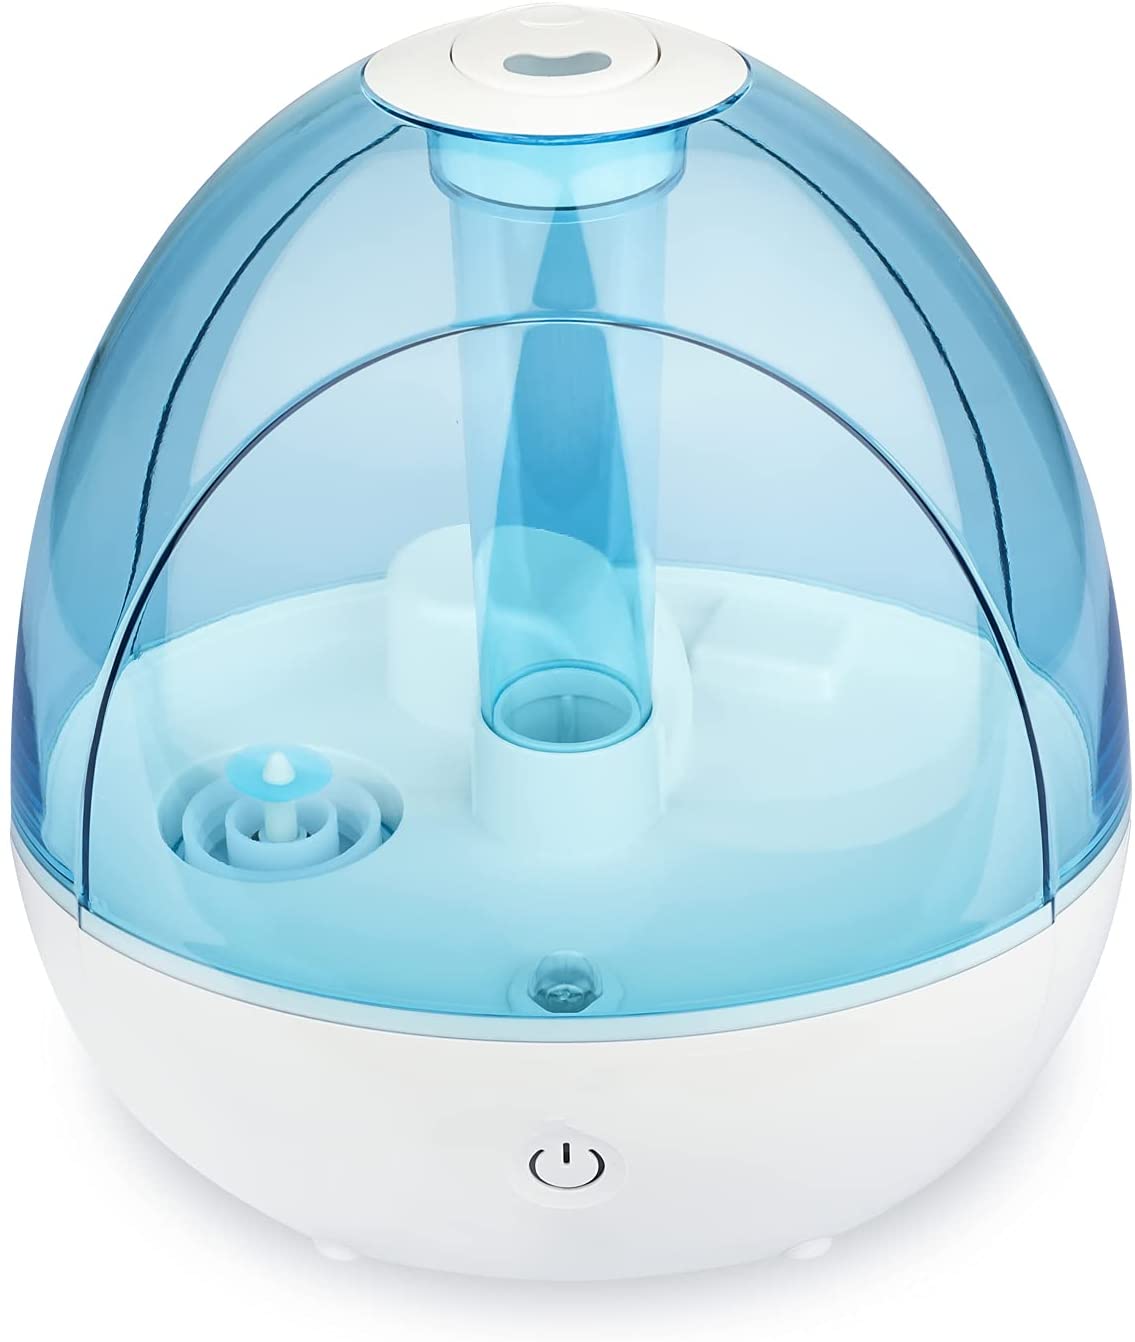 5 Best Filterless Humidifier For Large Rooms/Bedroom Reviews - Pro Baby ...